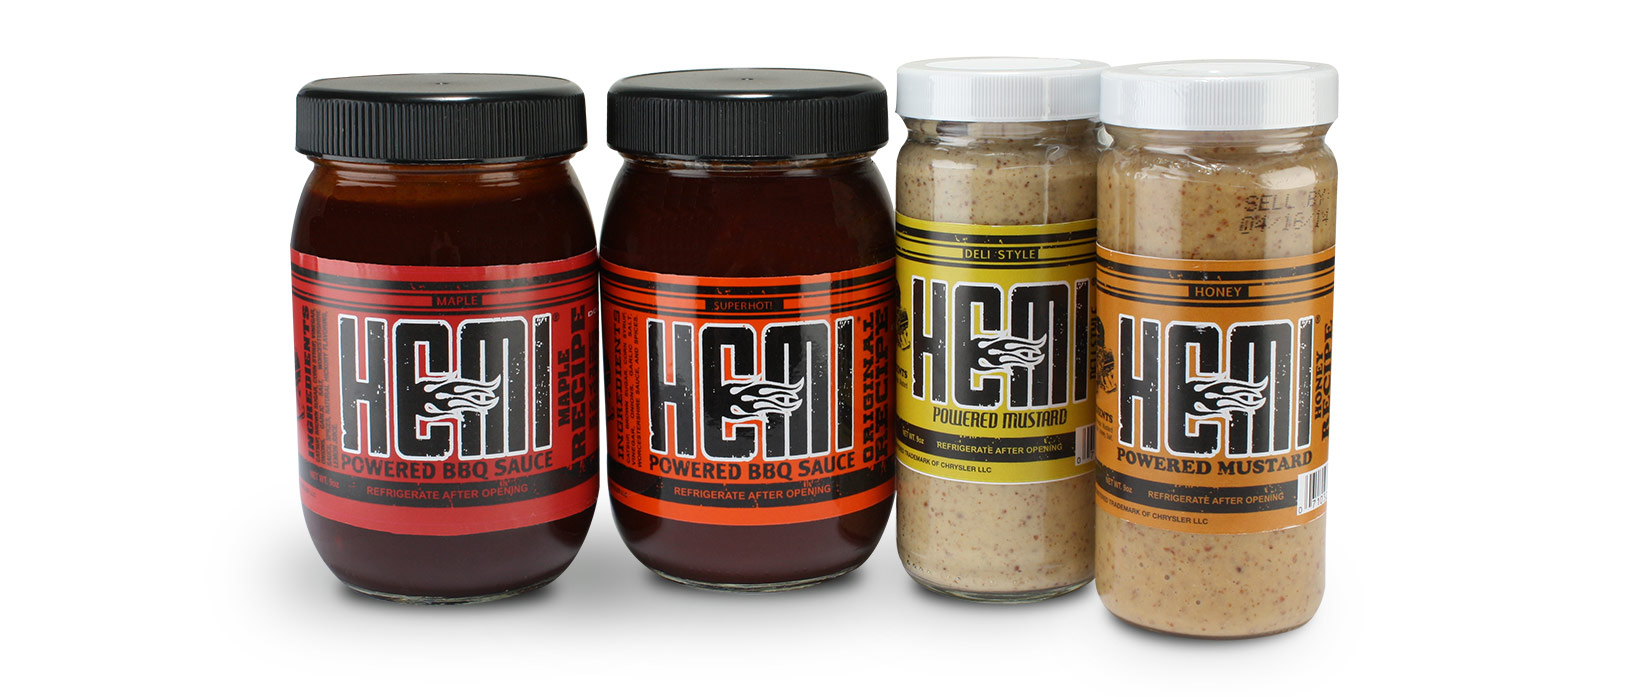 Turn Up the Horsepower with a HEMI<sup>®</sup> BBQ & Mustard Gift Set